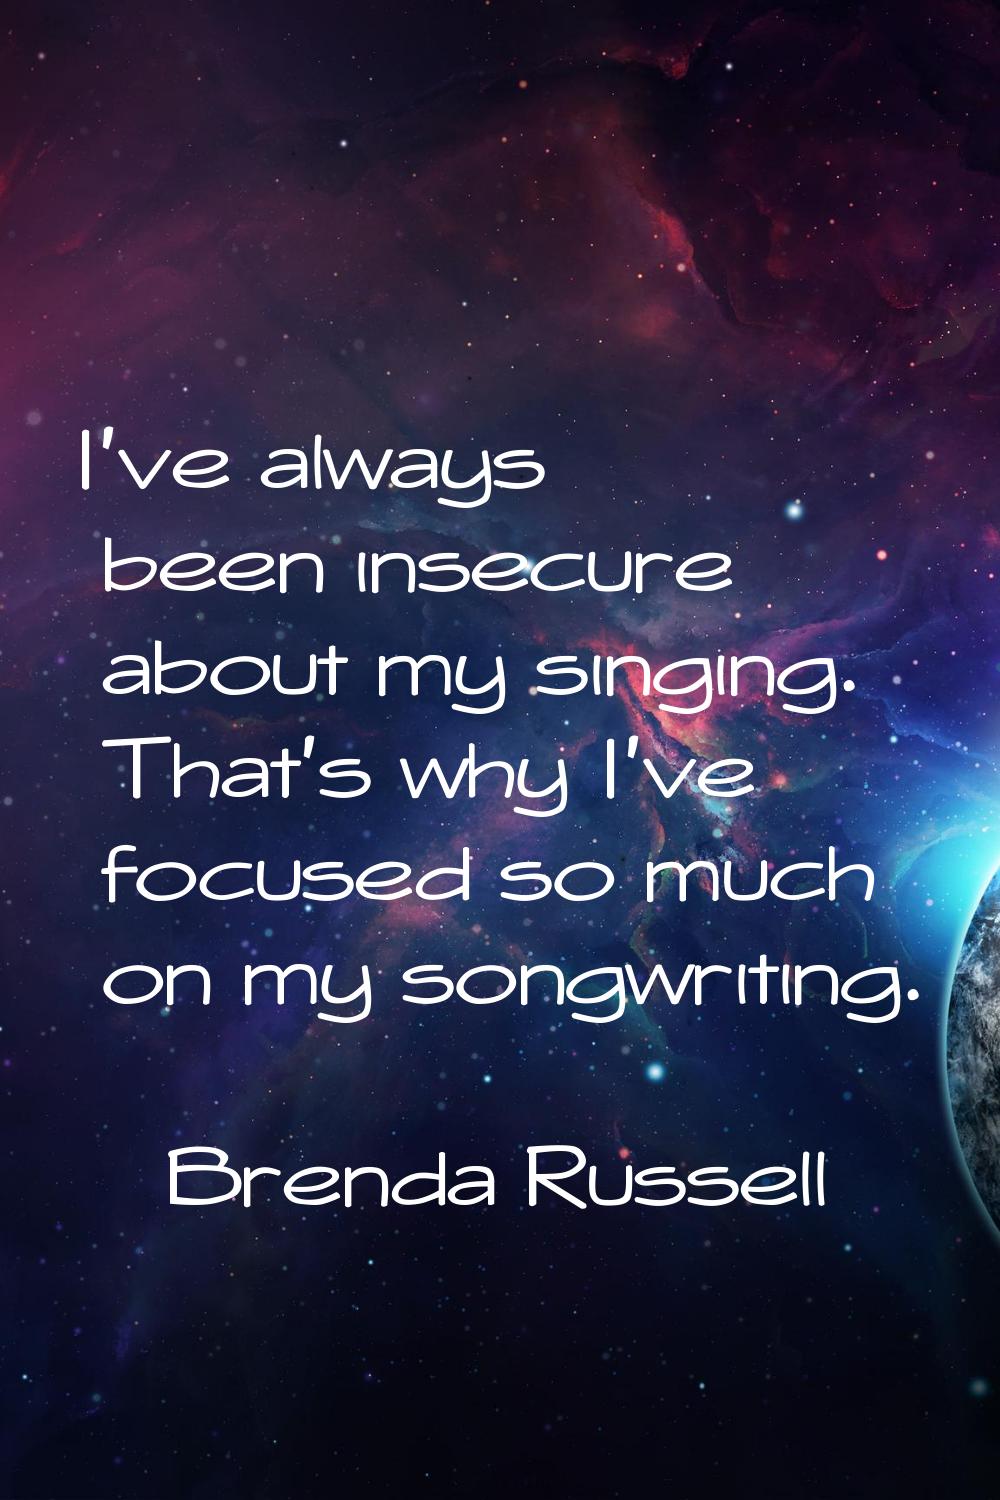 I've always been insecure about my singing. That's why I've focused so much on my songwriting.